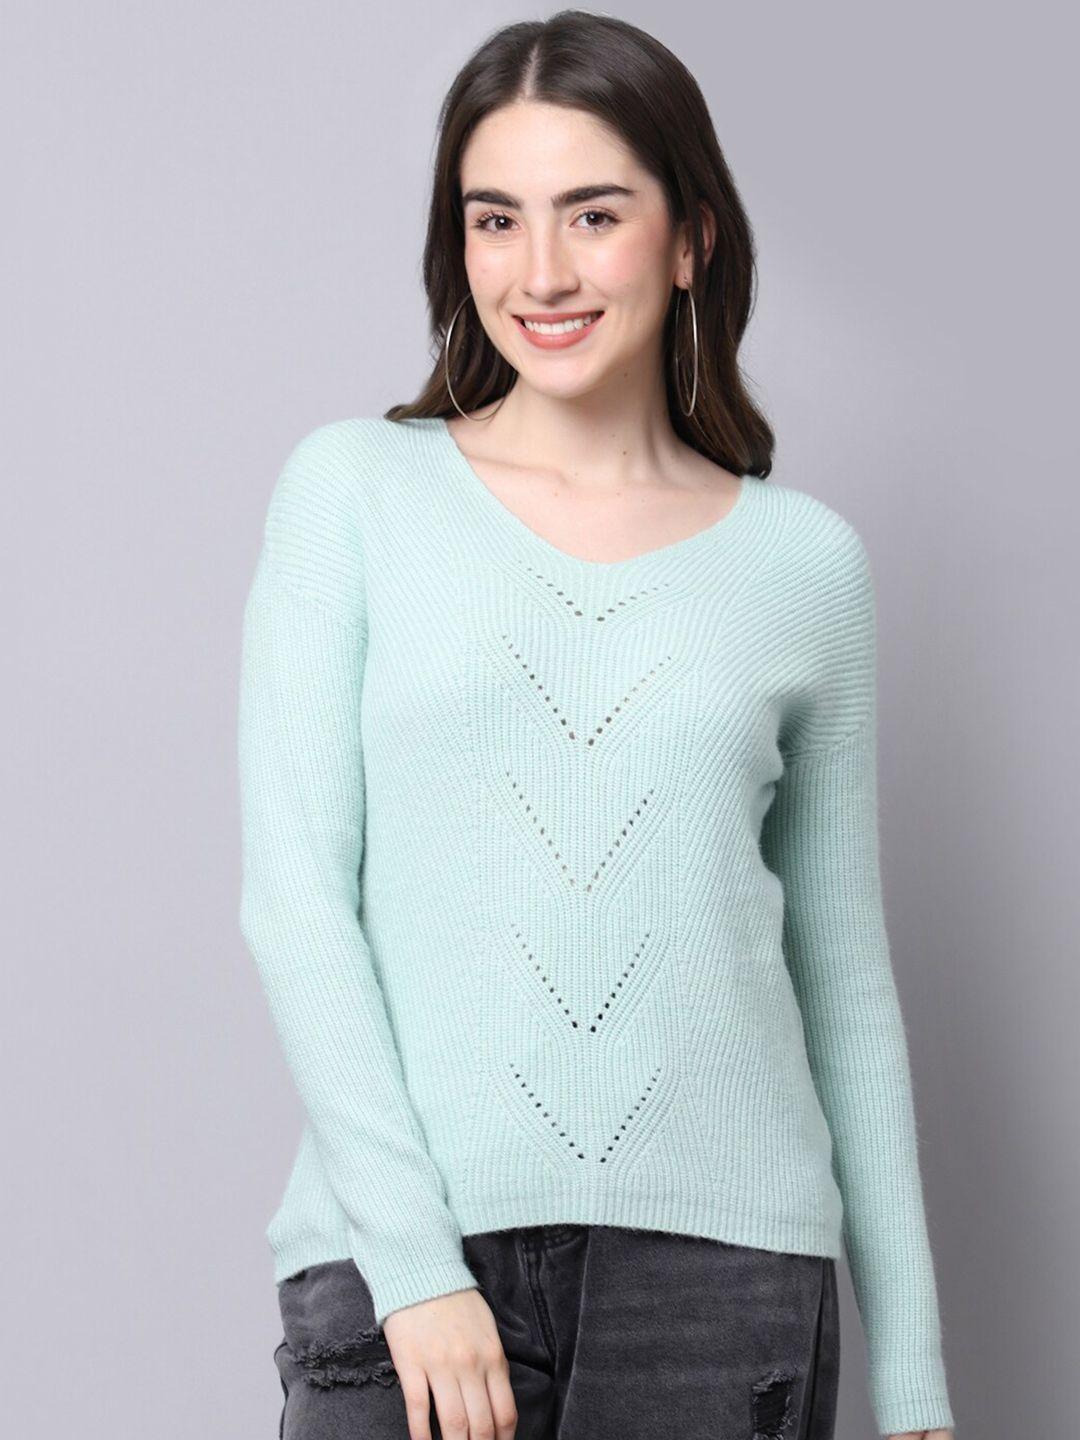 tag 7 open knit v-neck long sleeves knitted pullover sweater